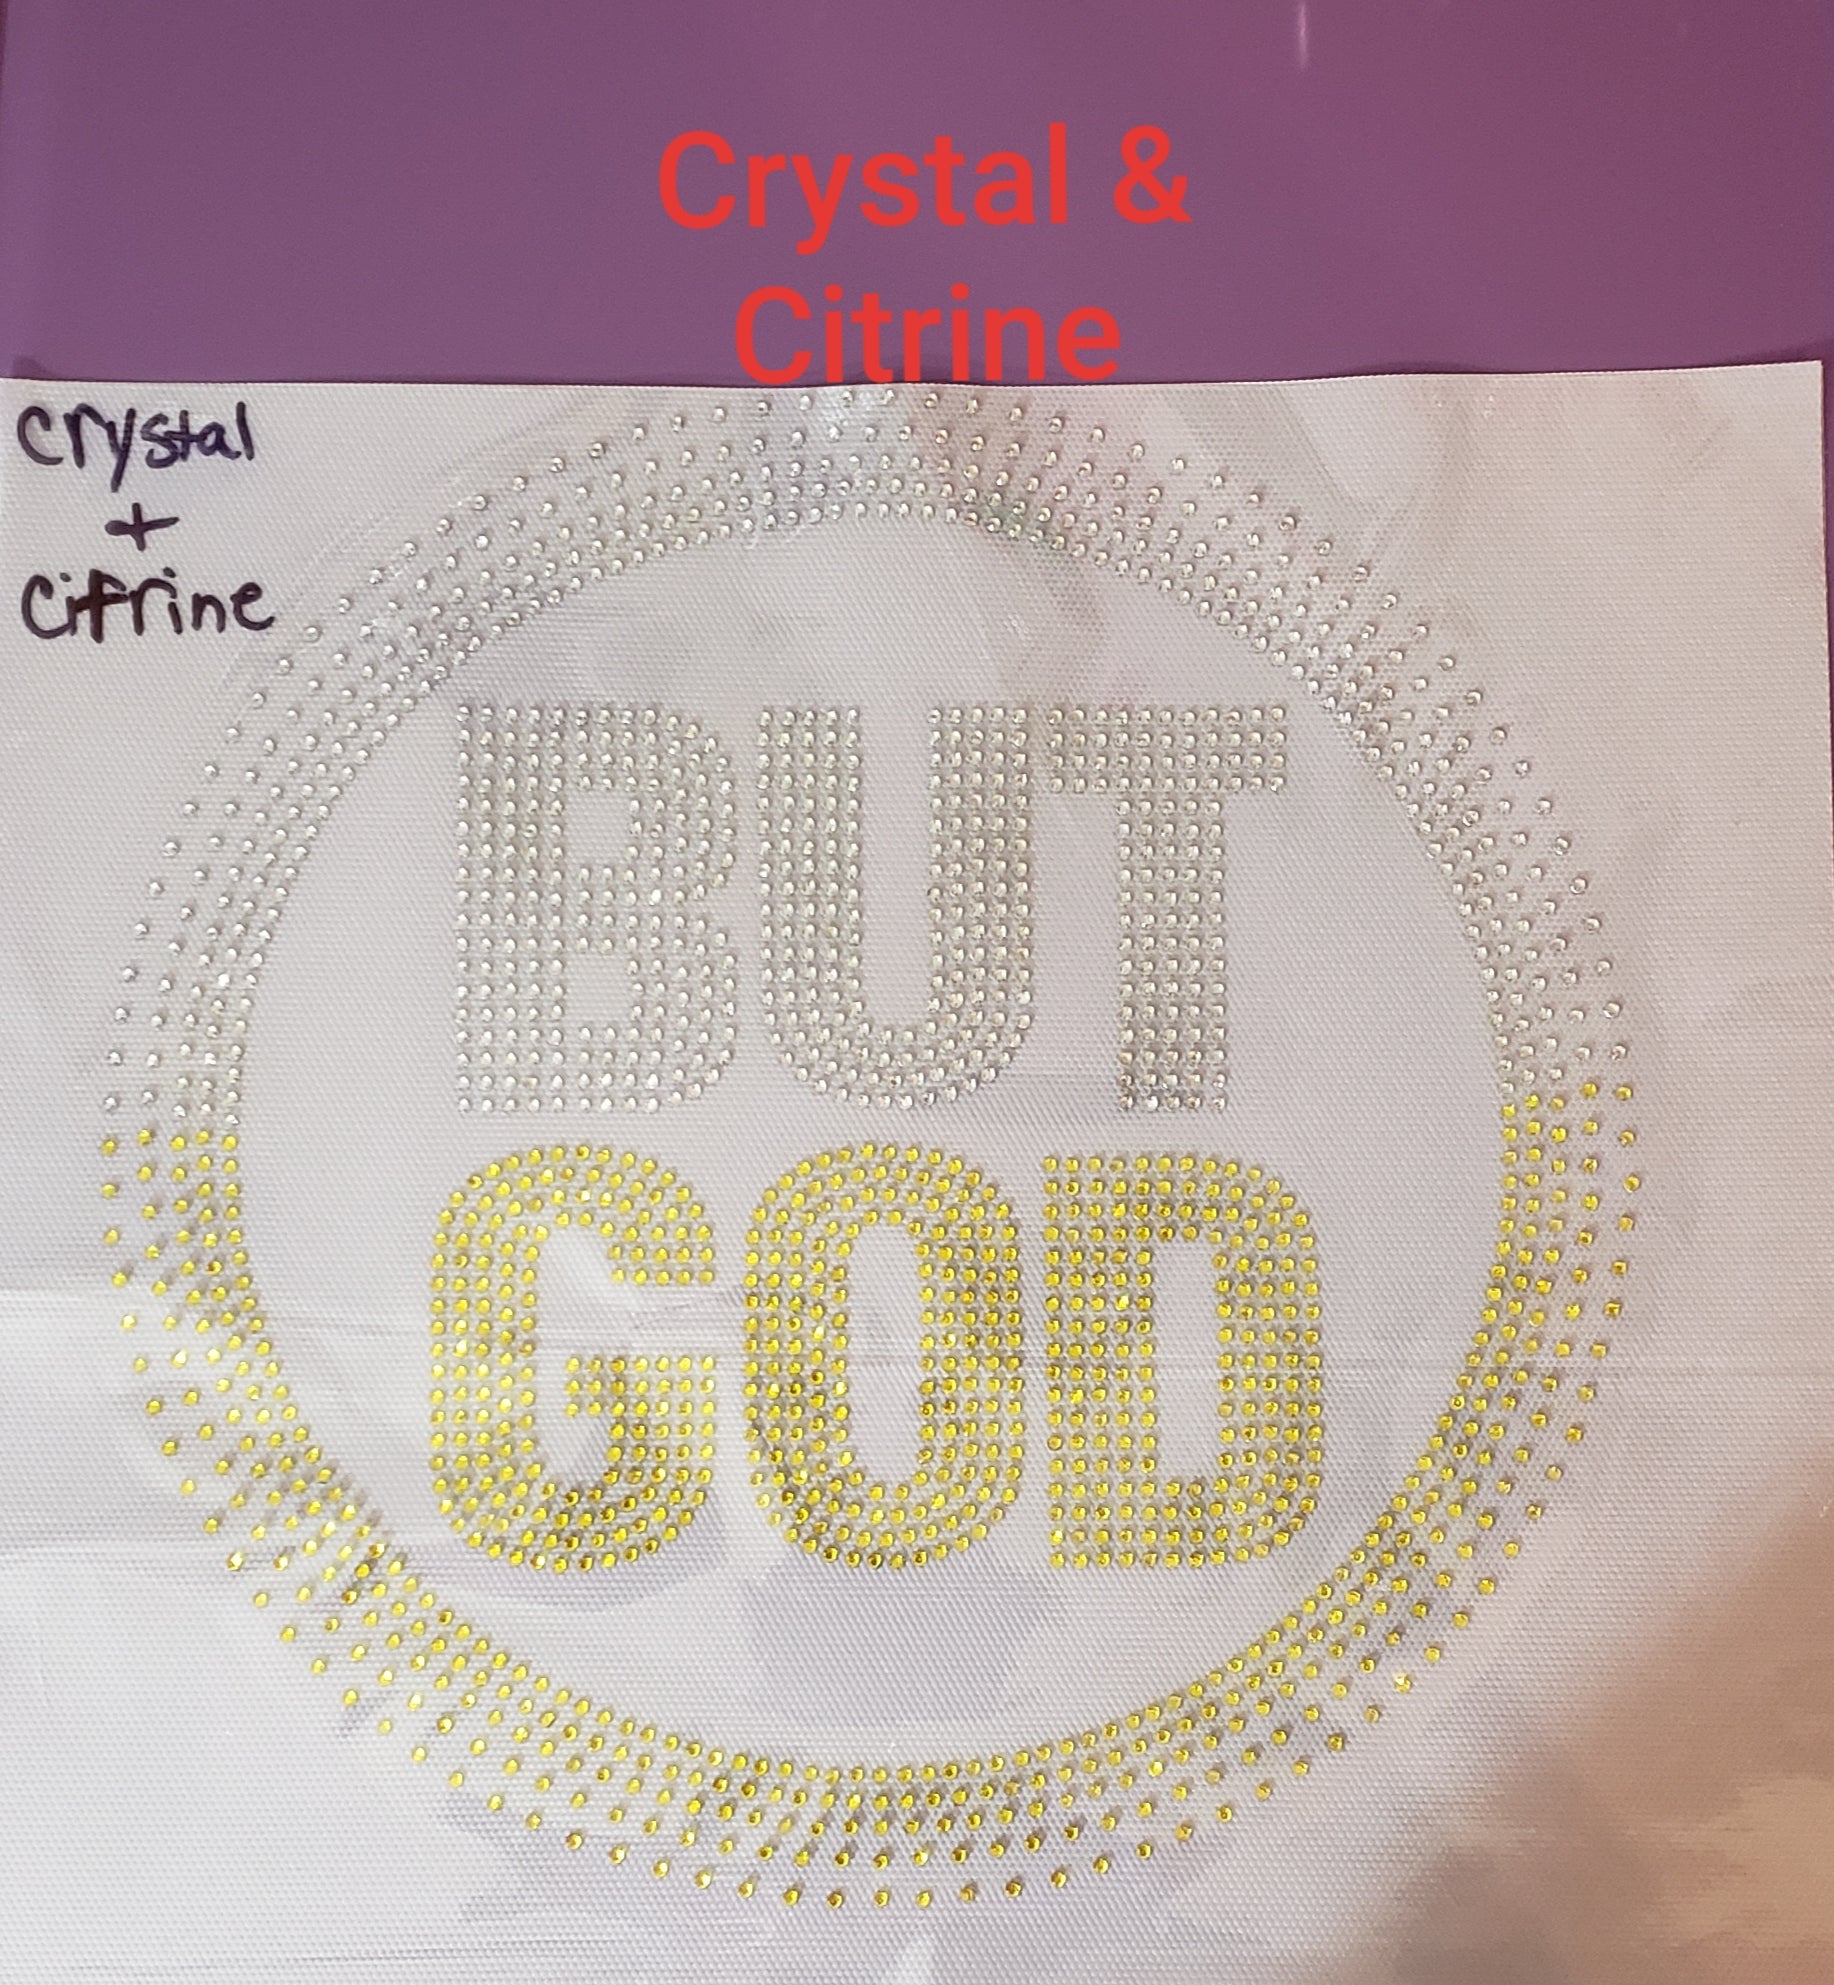 But God Rhinestone Shirt (Two Tone Colors) - JVN Creations & Designs